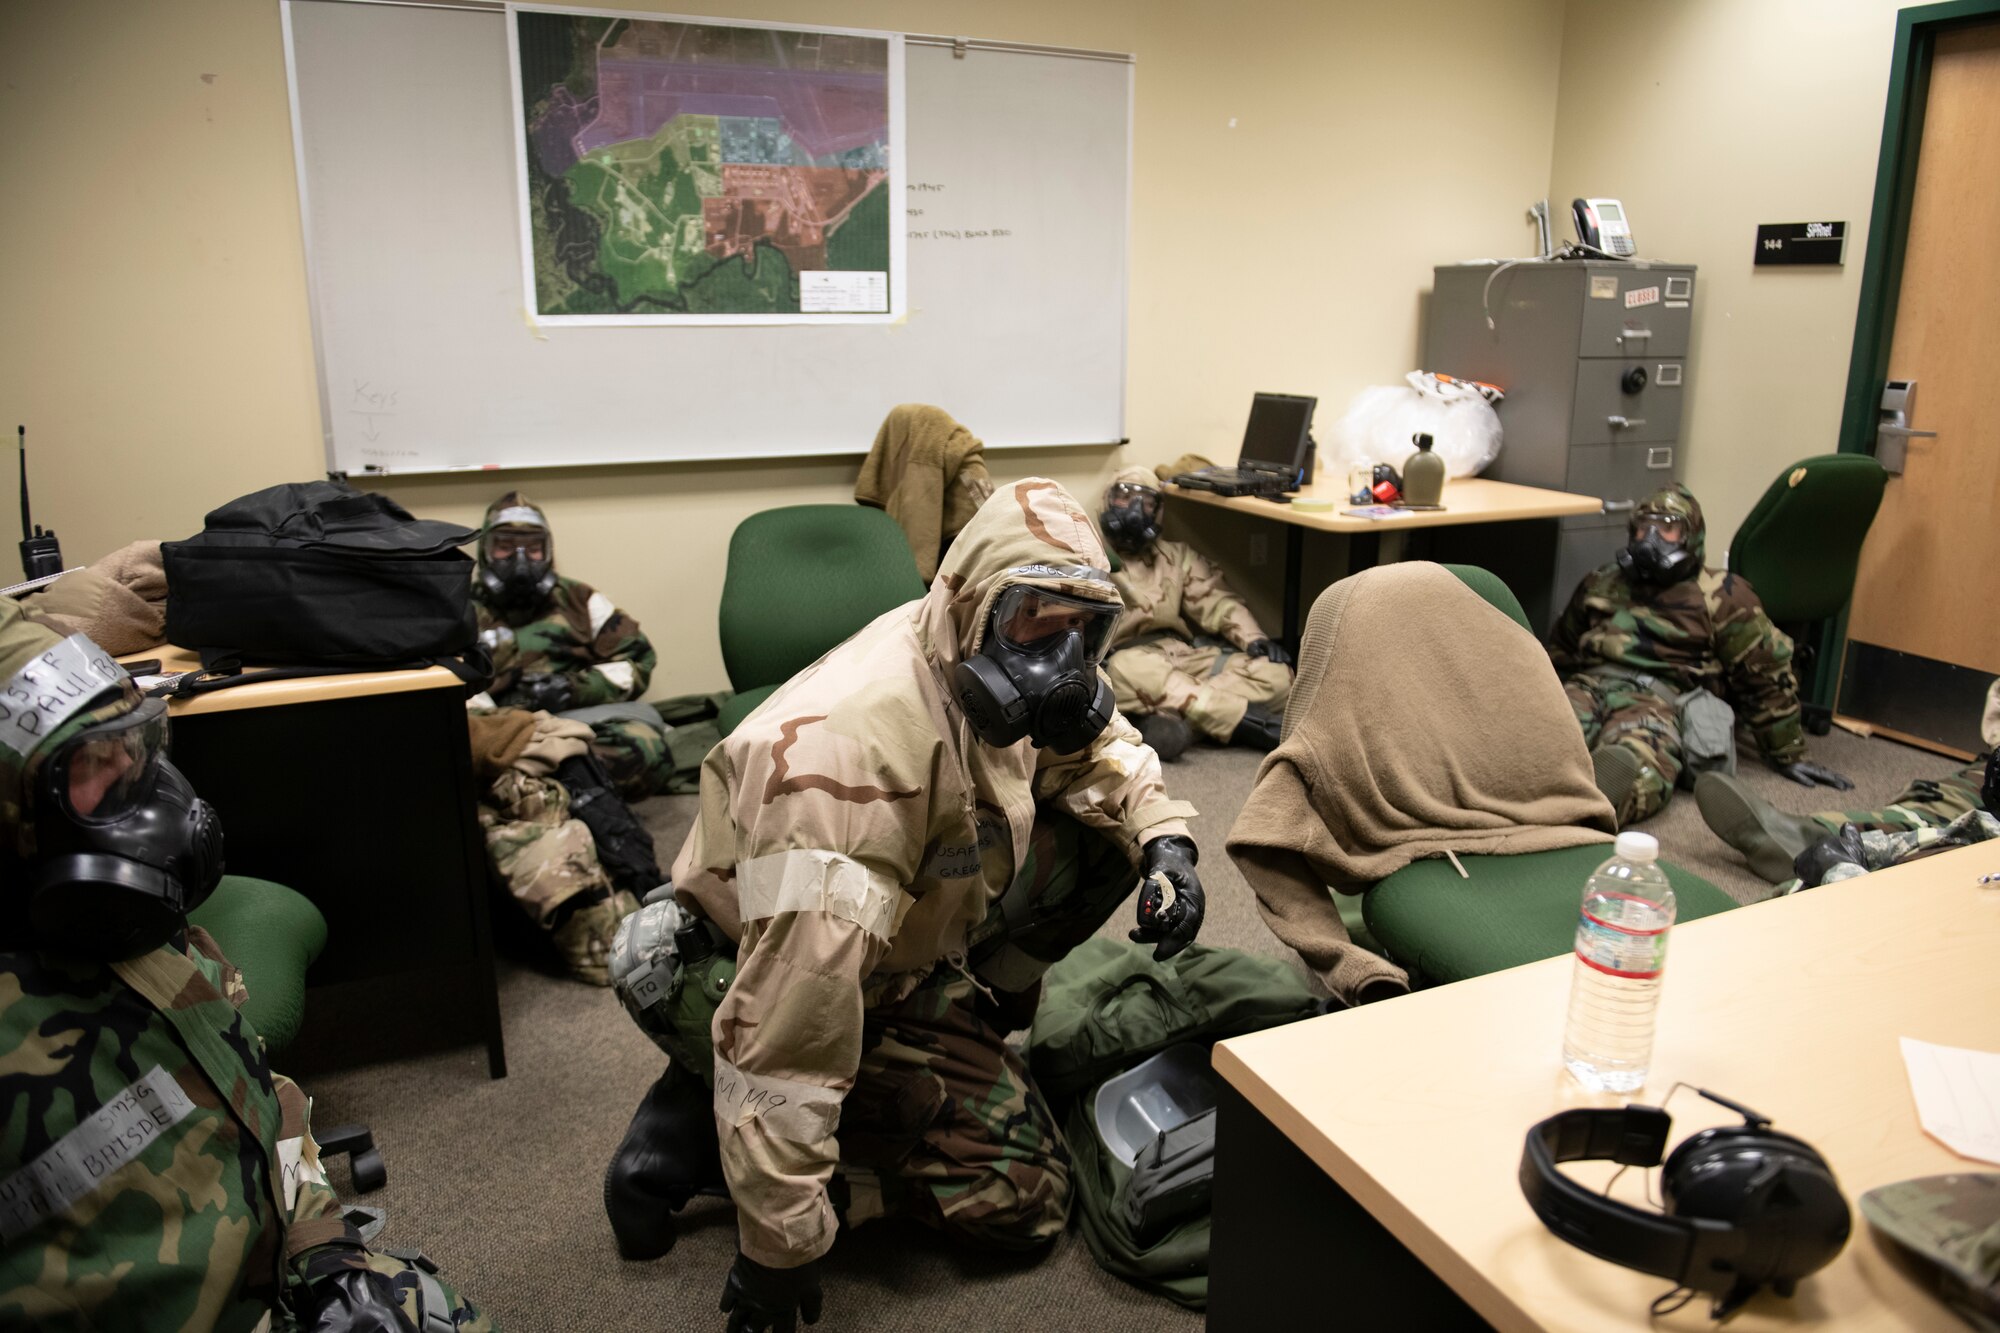 U.S. Airmen from the 60th Maintenance Squadron out of Travis Air Force Base, California, huddle for safety during a simulated chemical attack at the Alpena Combat Readiness Training Center, Alpena, Michigan, April 11, 2022. There are five Airmen pictured, siting or taking a knee on the floor of an office-like room.